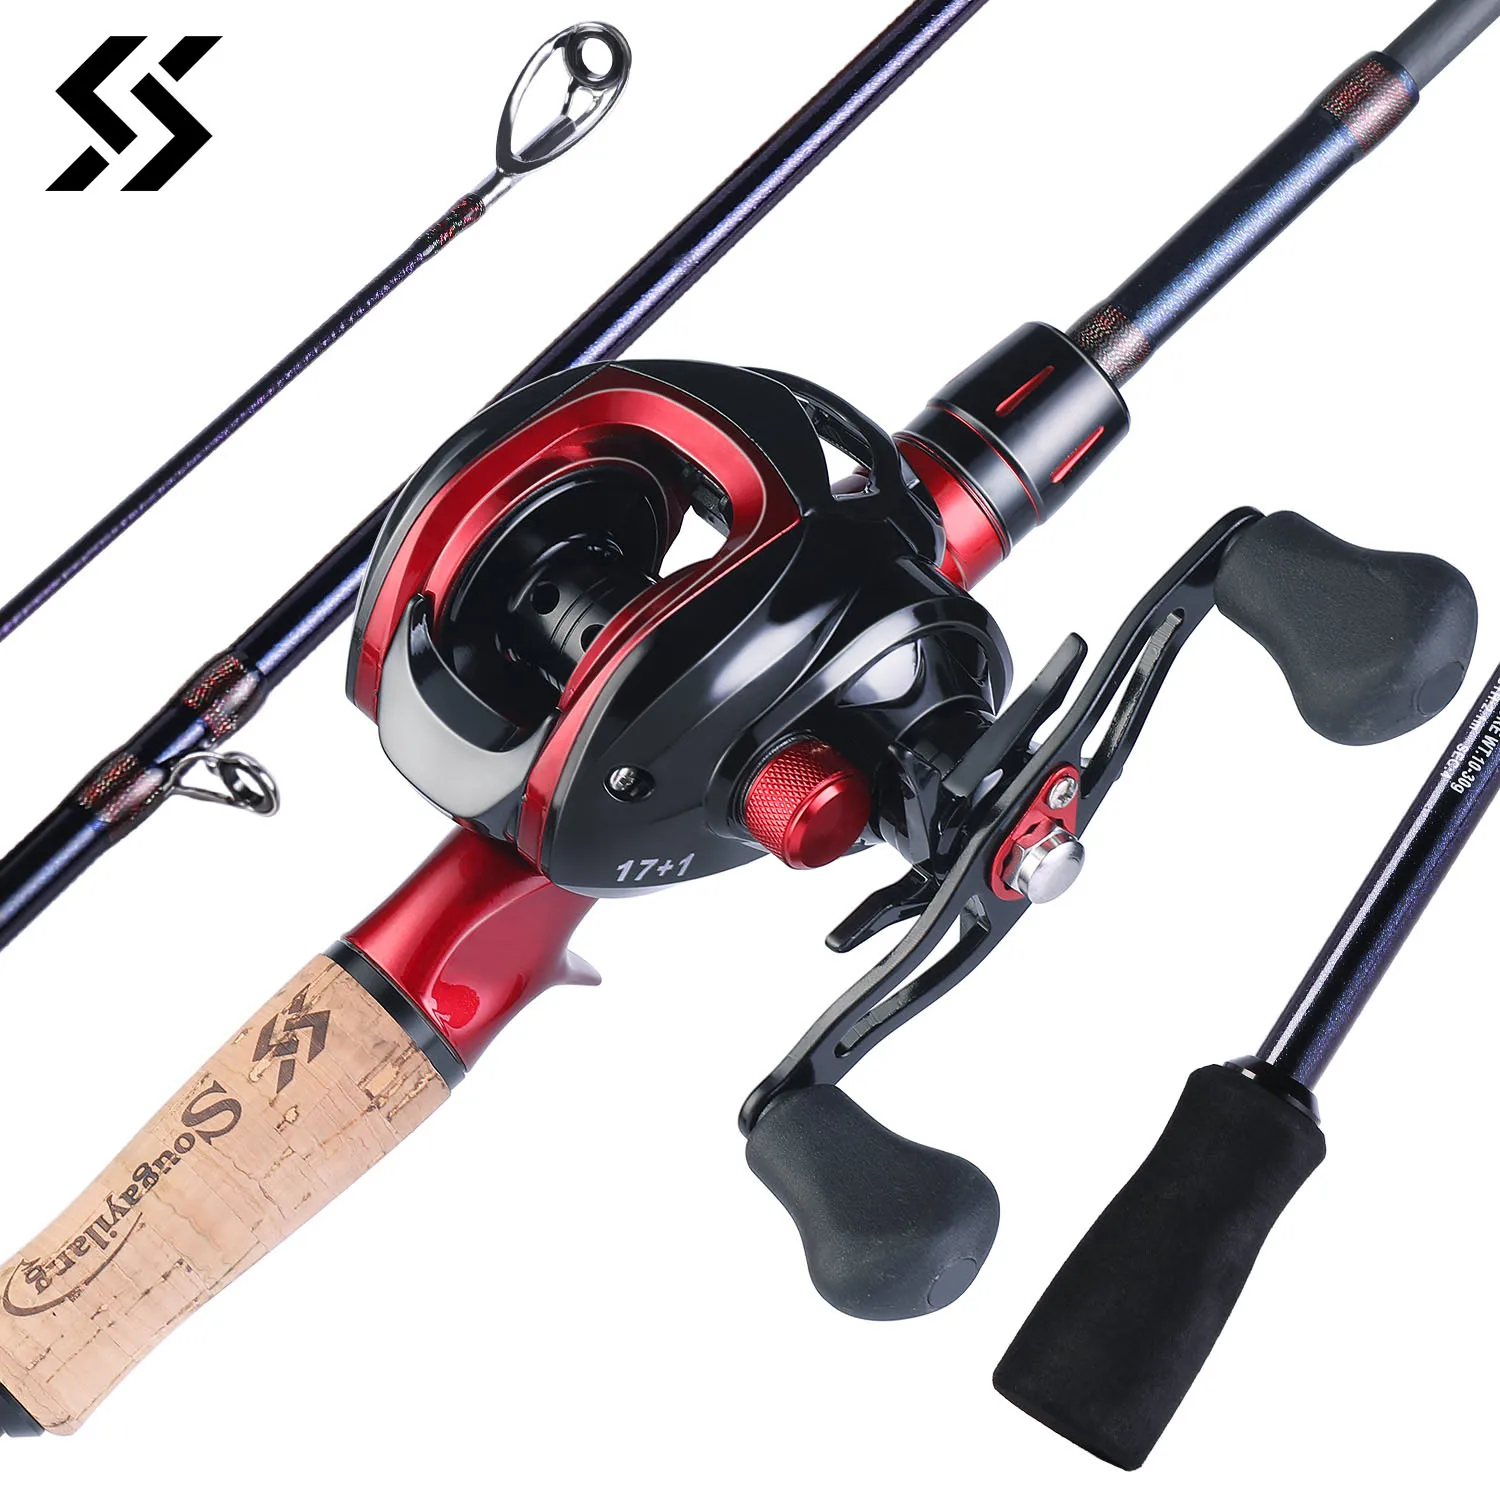 Sougayilang Casting Fishing Rod Combo Carbon Fiber Rod And 7.1:1 Gear Ratio  Fresh Saltwater Magnetic Brake System Reel Pesca - Rod Combo - AliExpress